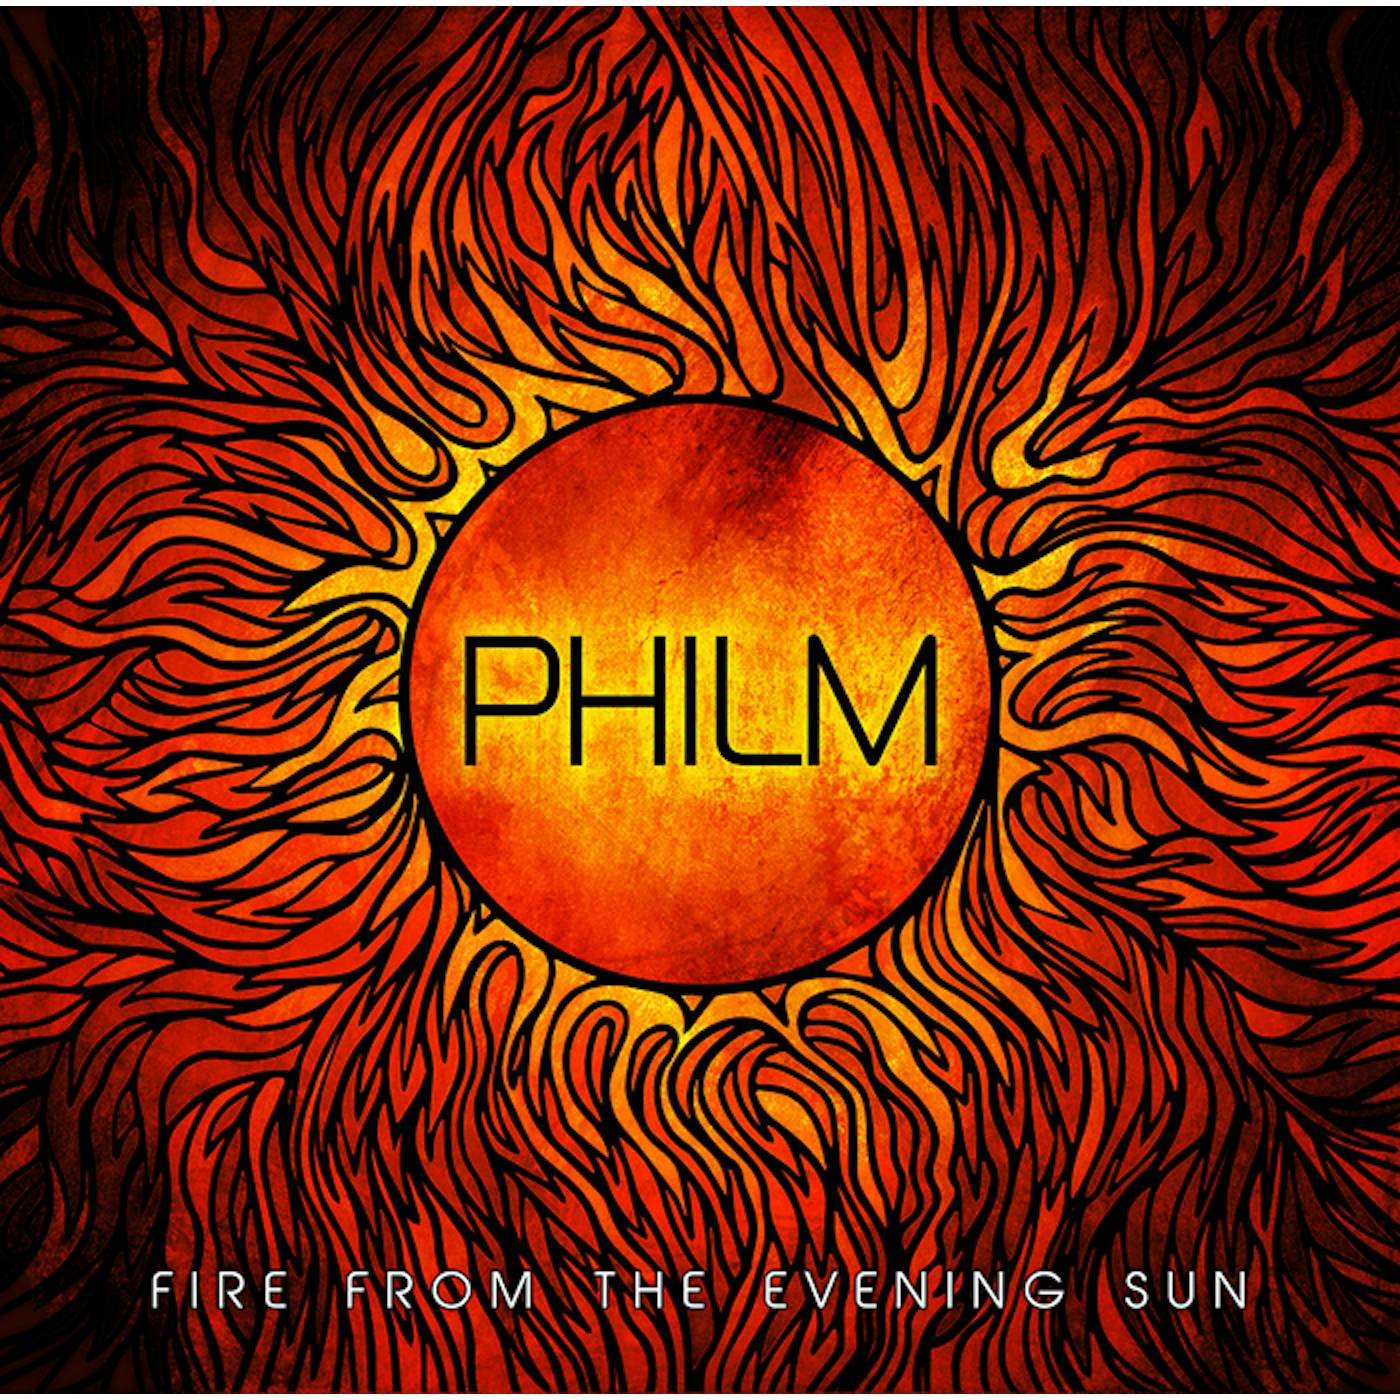 PHILM FIRE FROM THE EVENING SUN CD